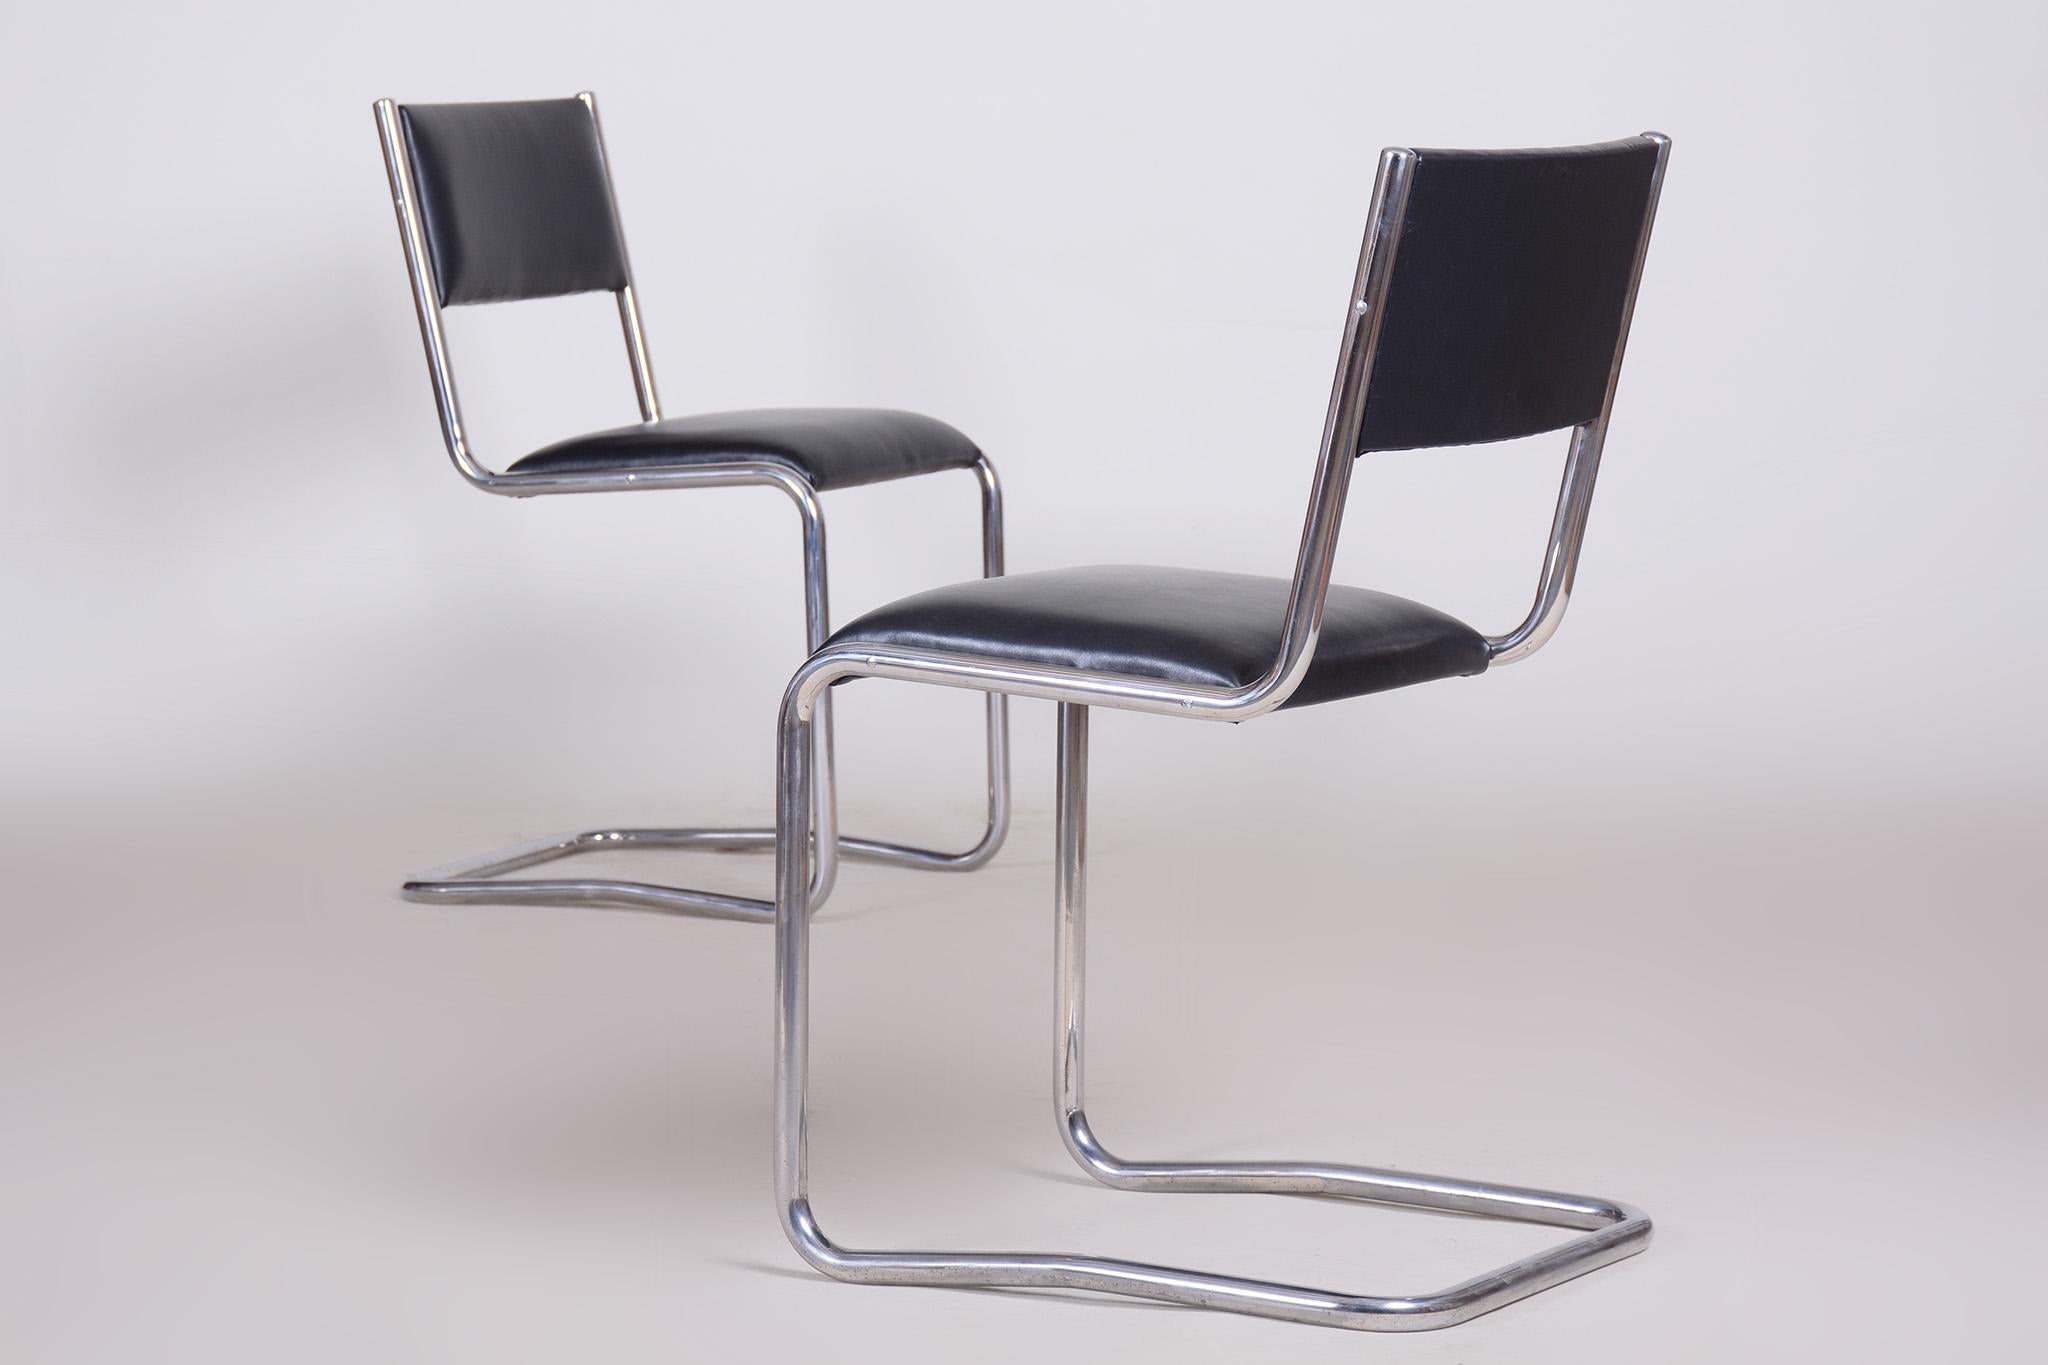 Black Leather Bauhaus Chairs, 1930s Czechia For Sale 10